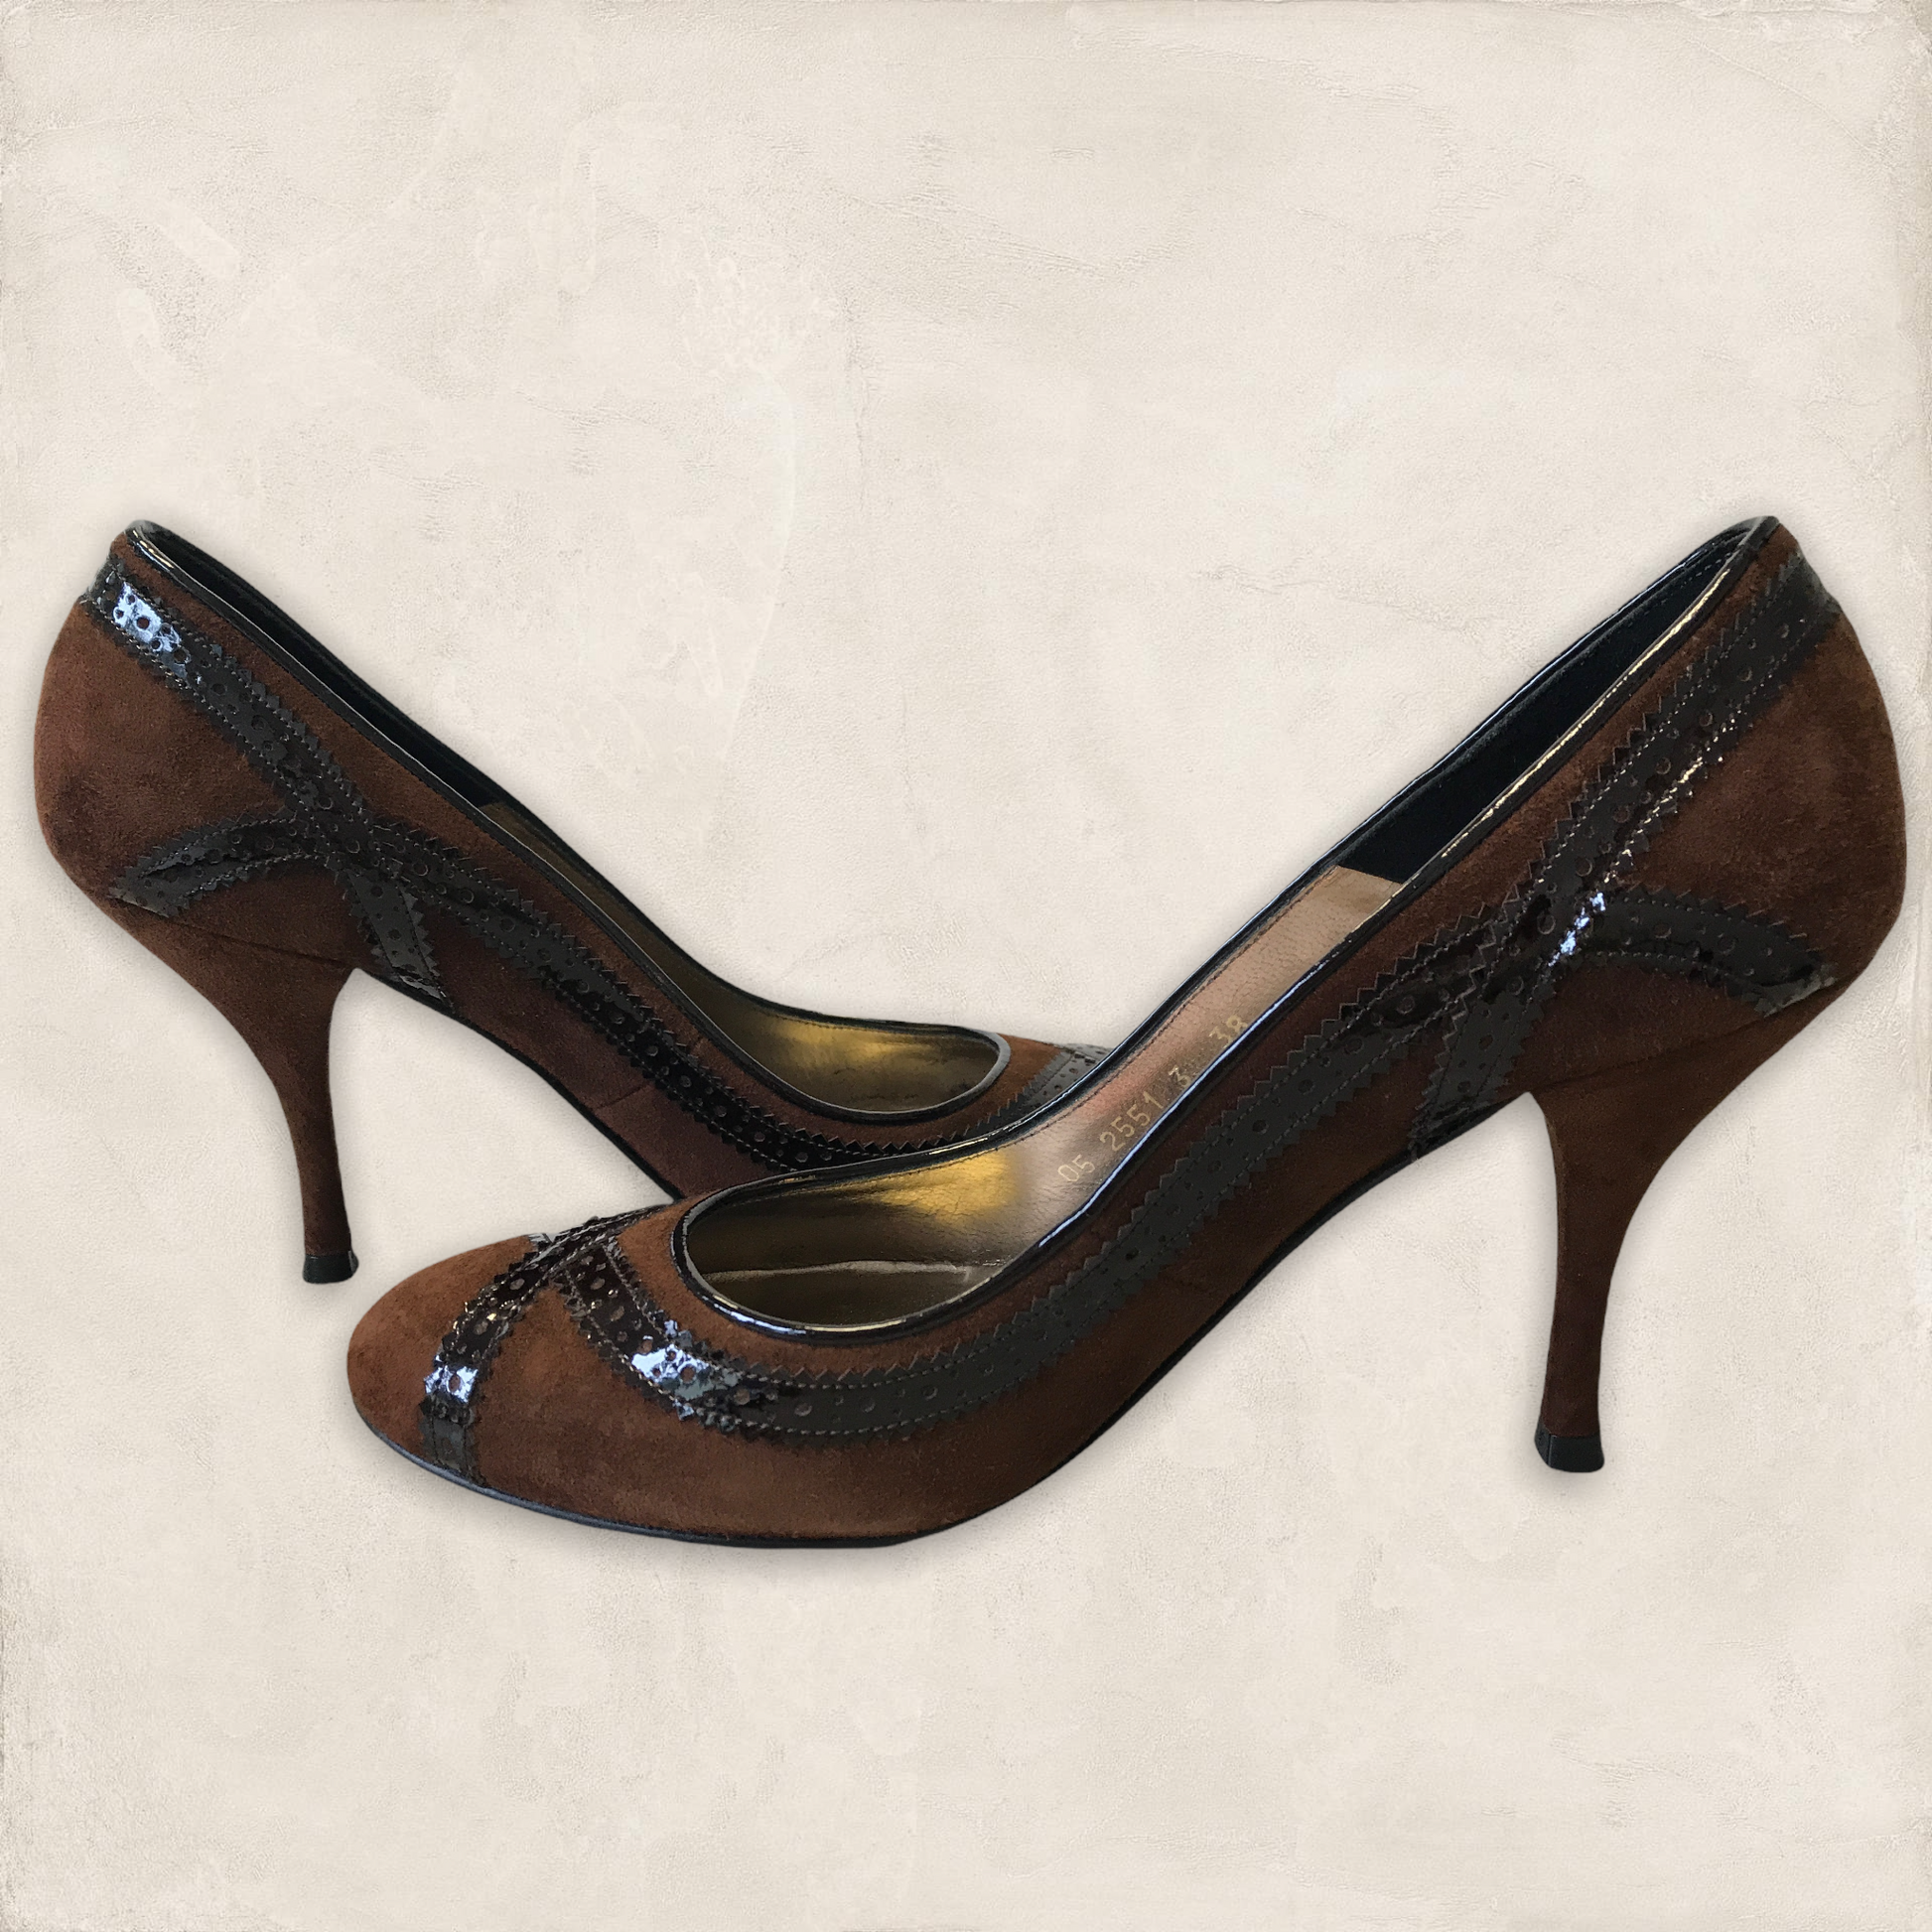 Magrit Brown Stiletto Heel Suede Court Shoe UK 5 US 7.5 EU 38 RRP £170 Timeless Fashions